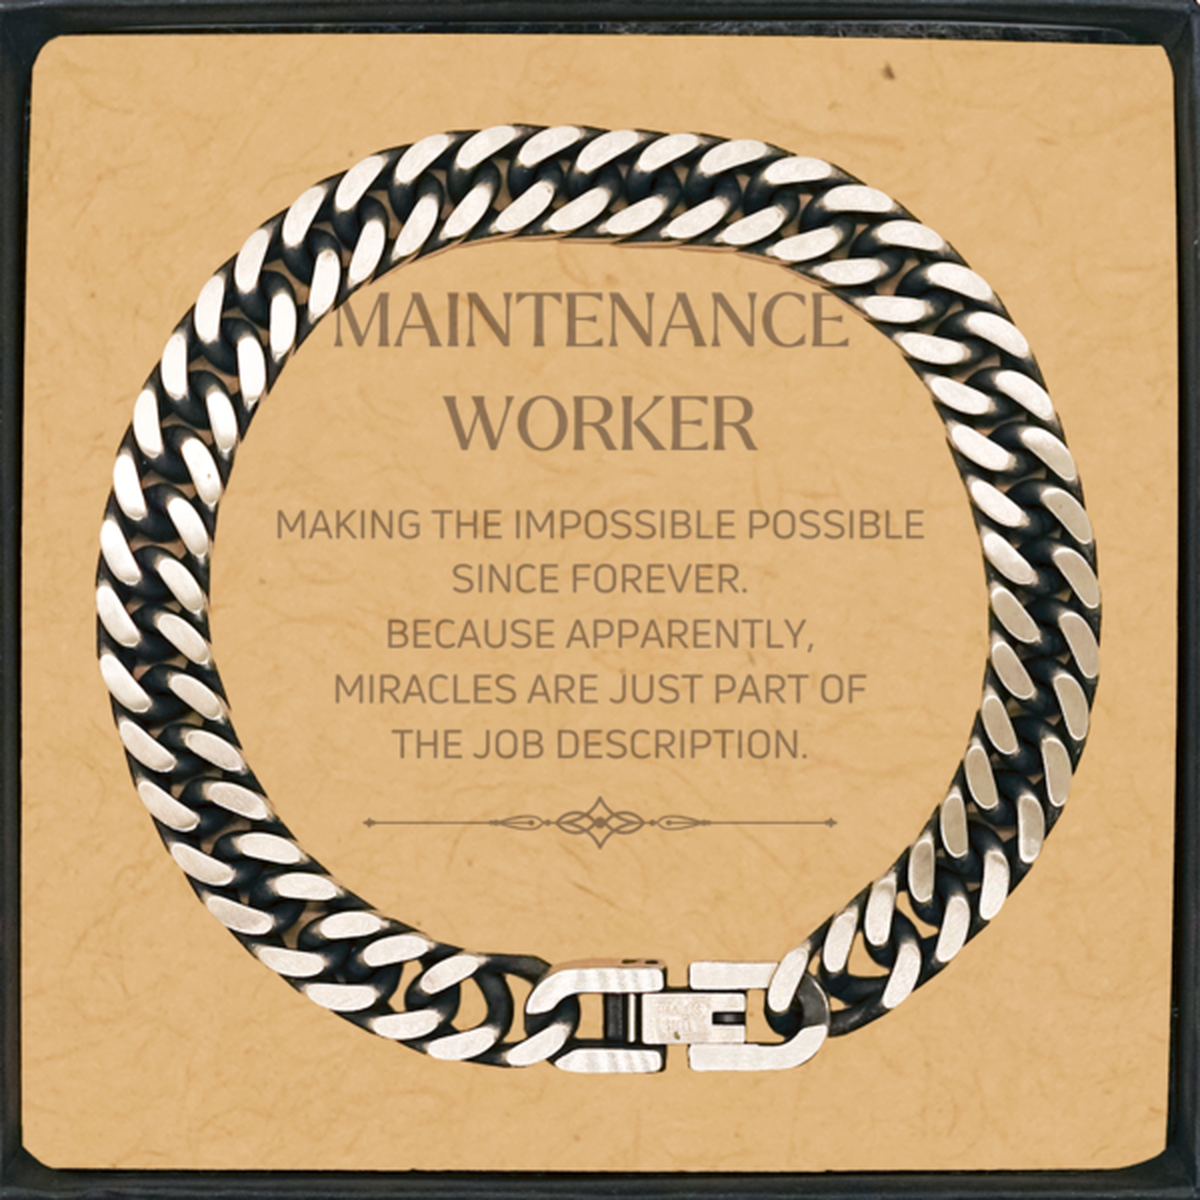 Funny Maintenance Worker Gifts, Miracles are just part of the job description, Inspirational Birthday Cuban Link Chain Bracelet For Maintenance Worker, Men, Women, Coworkers, Friends, Boss